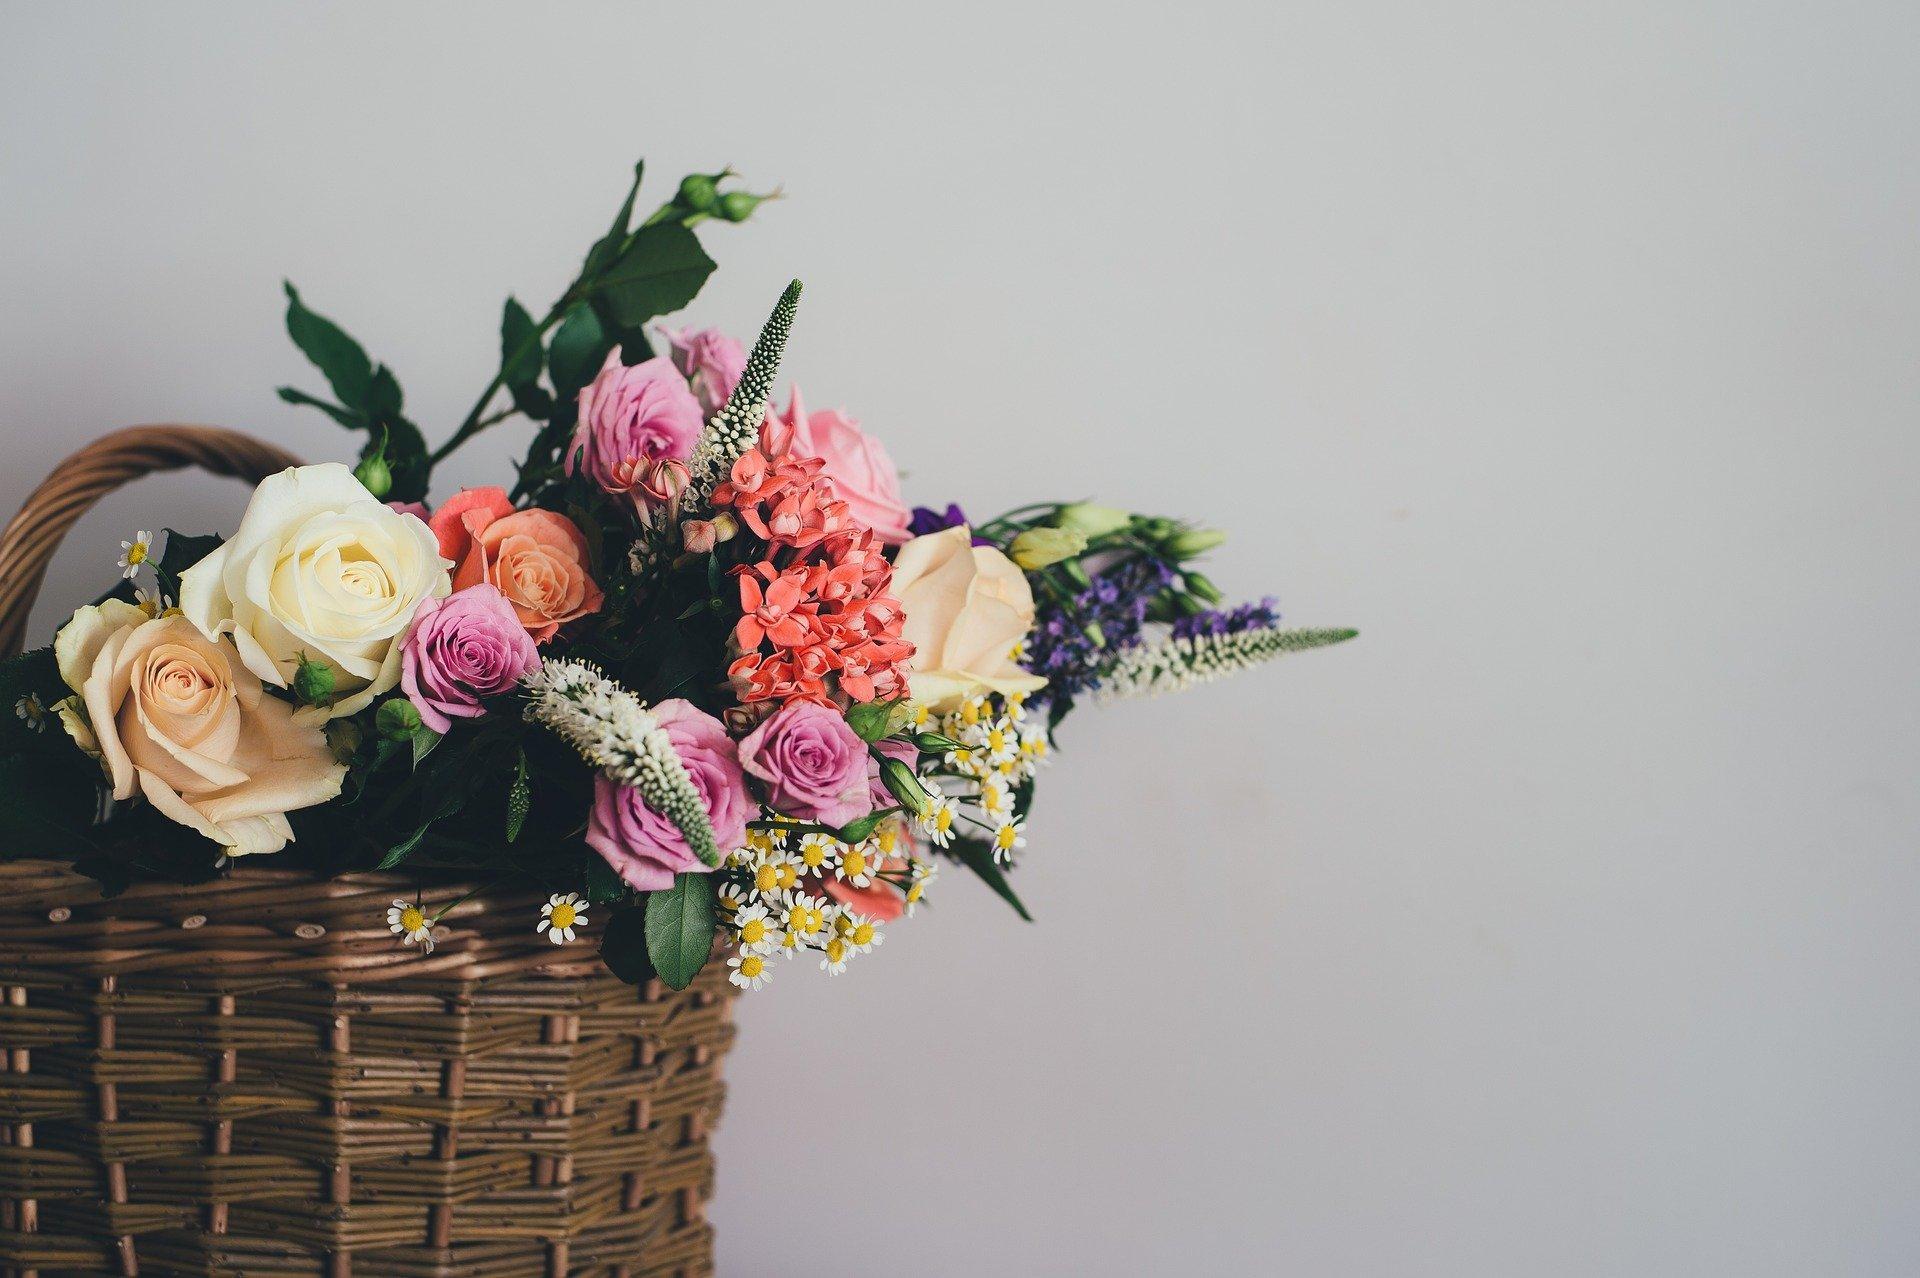 The 5 Flower Arrangement Mistakes You’re Making (But Shouldn’t)